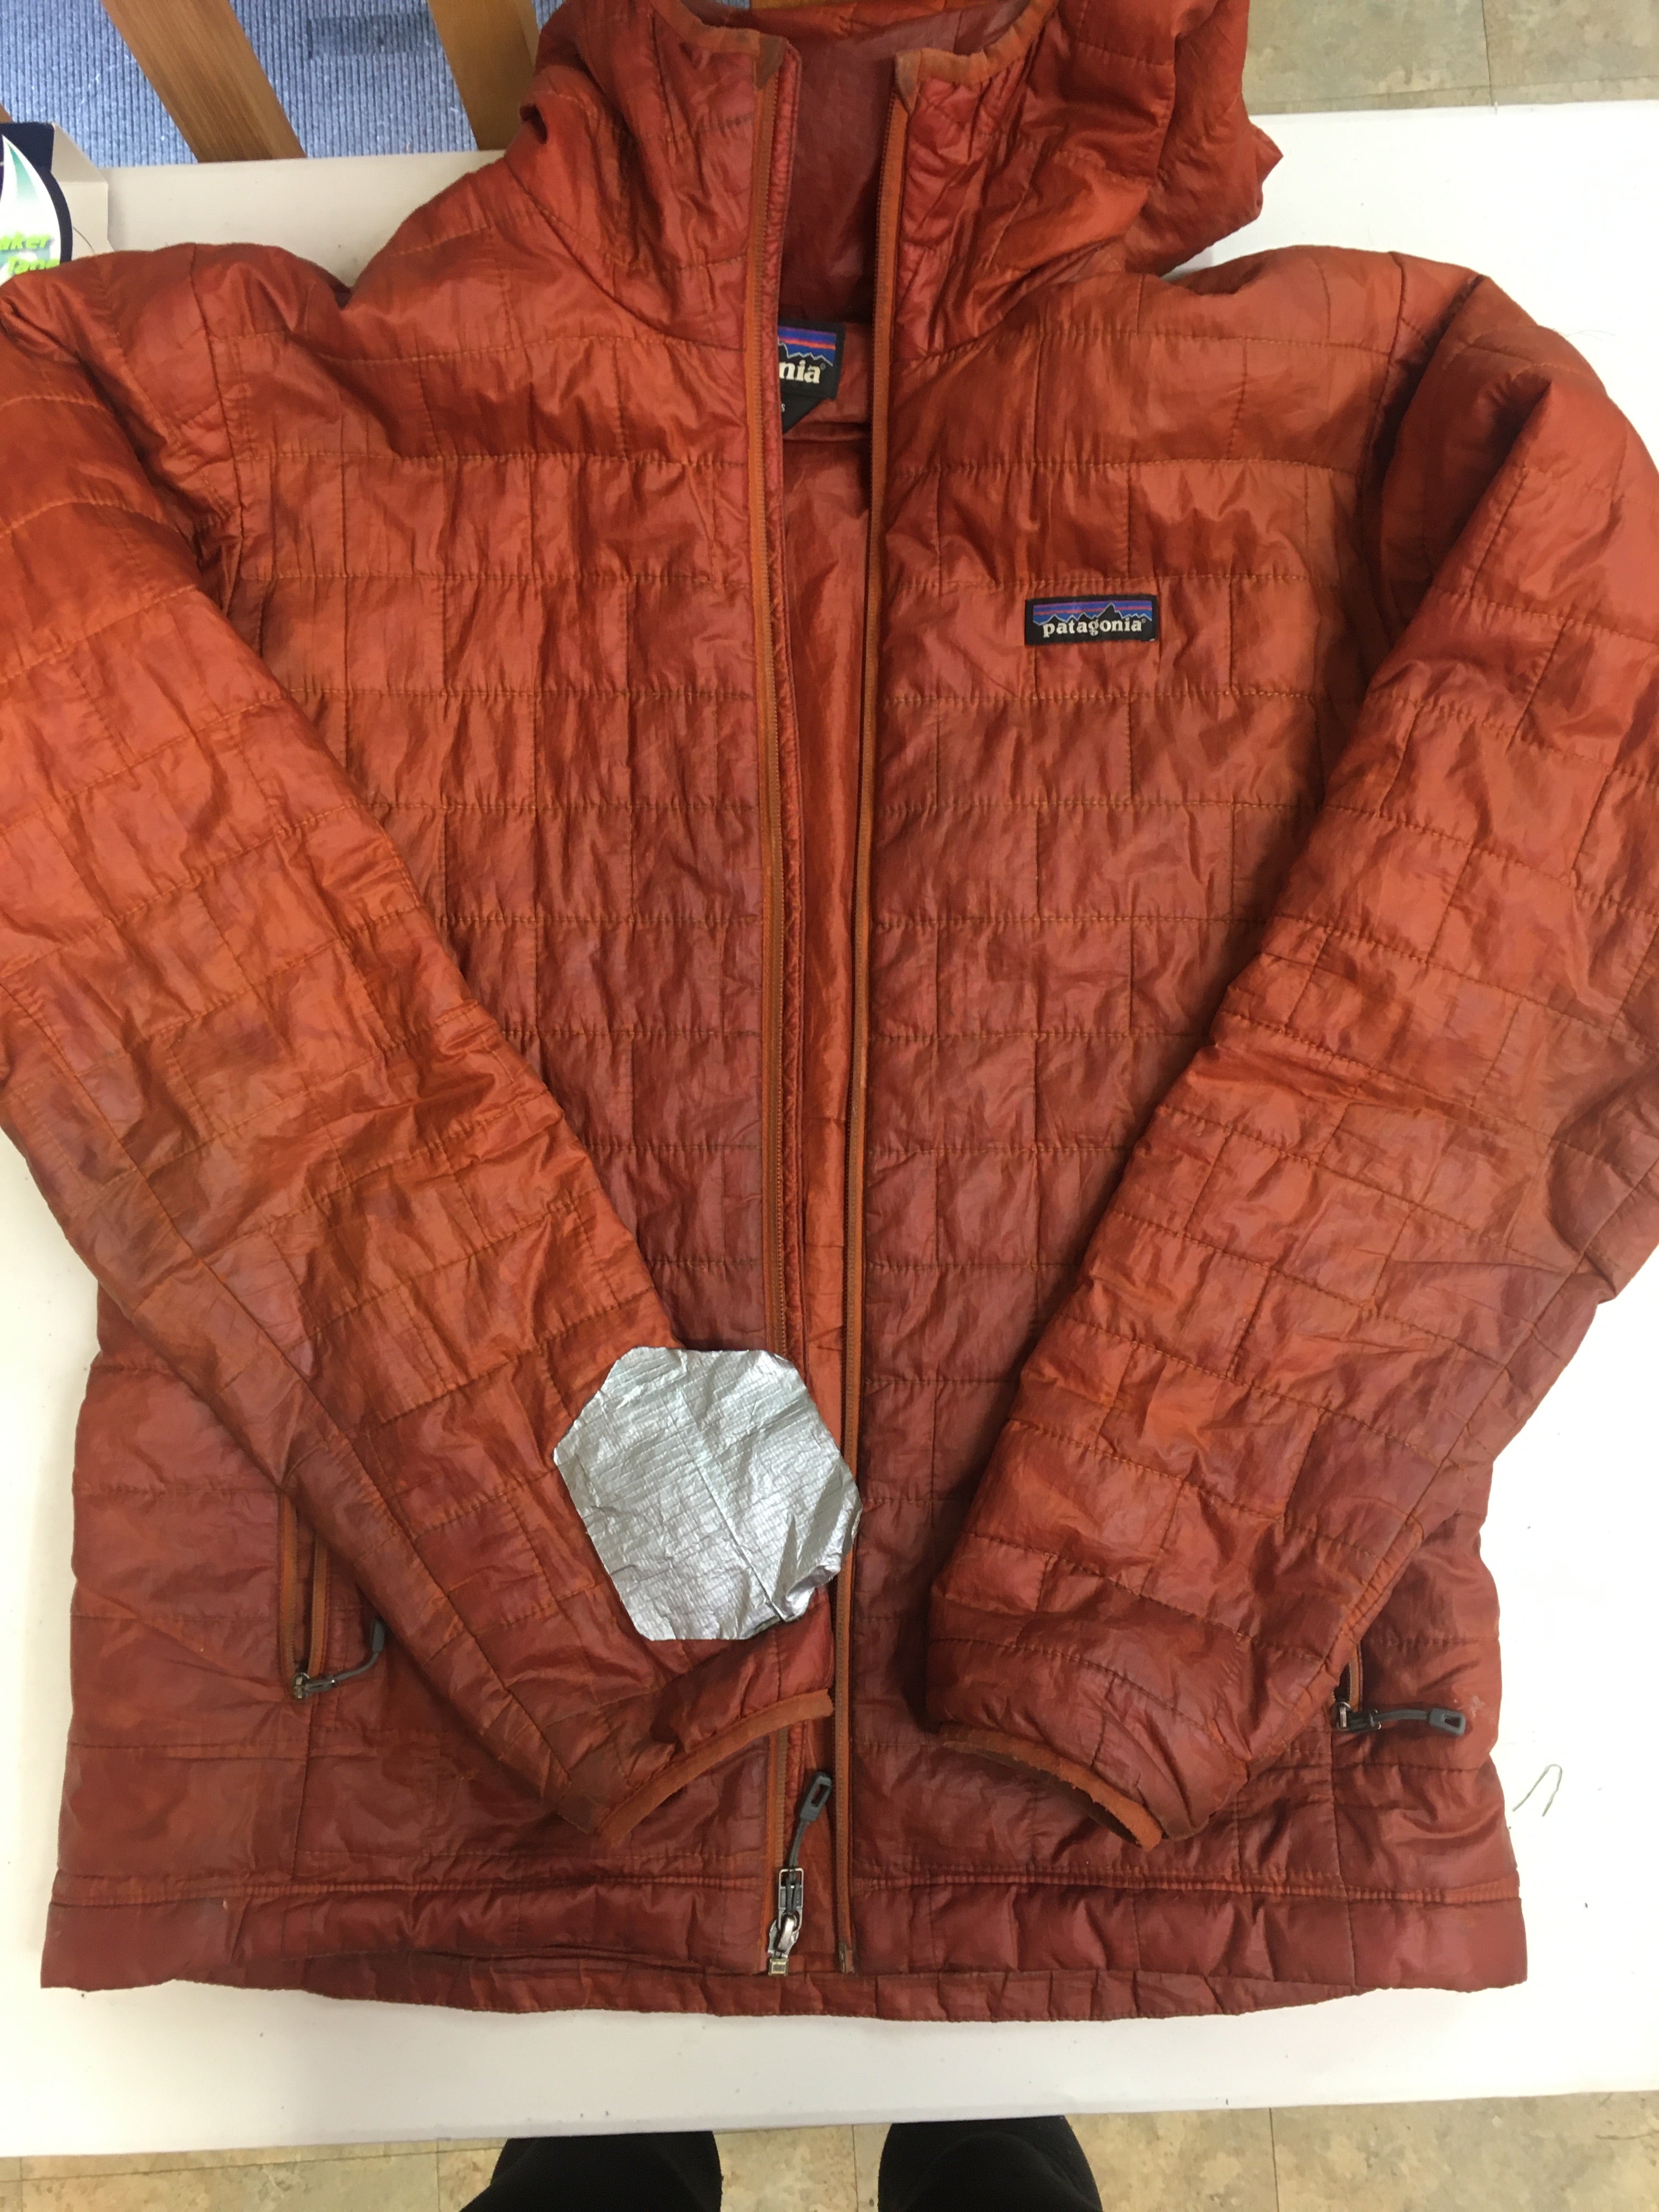 patched up Patagonia jacket